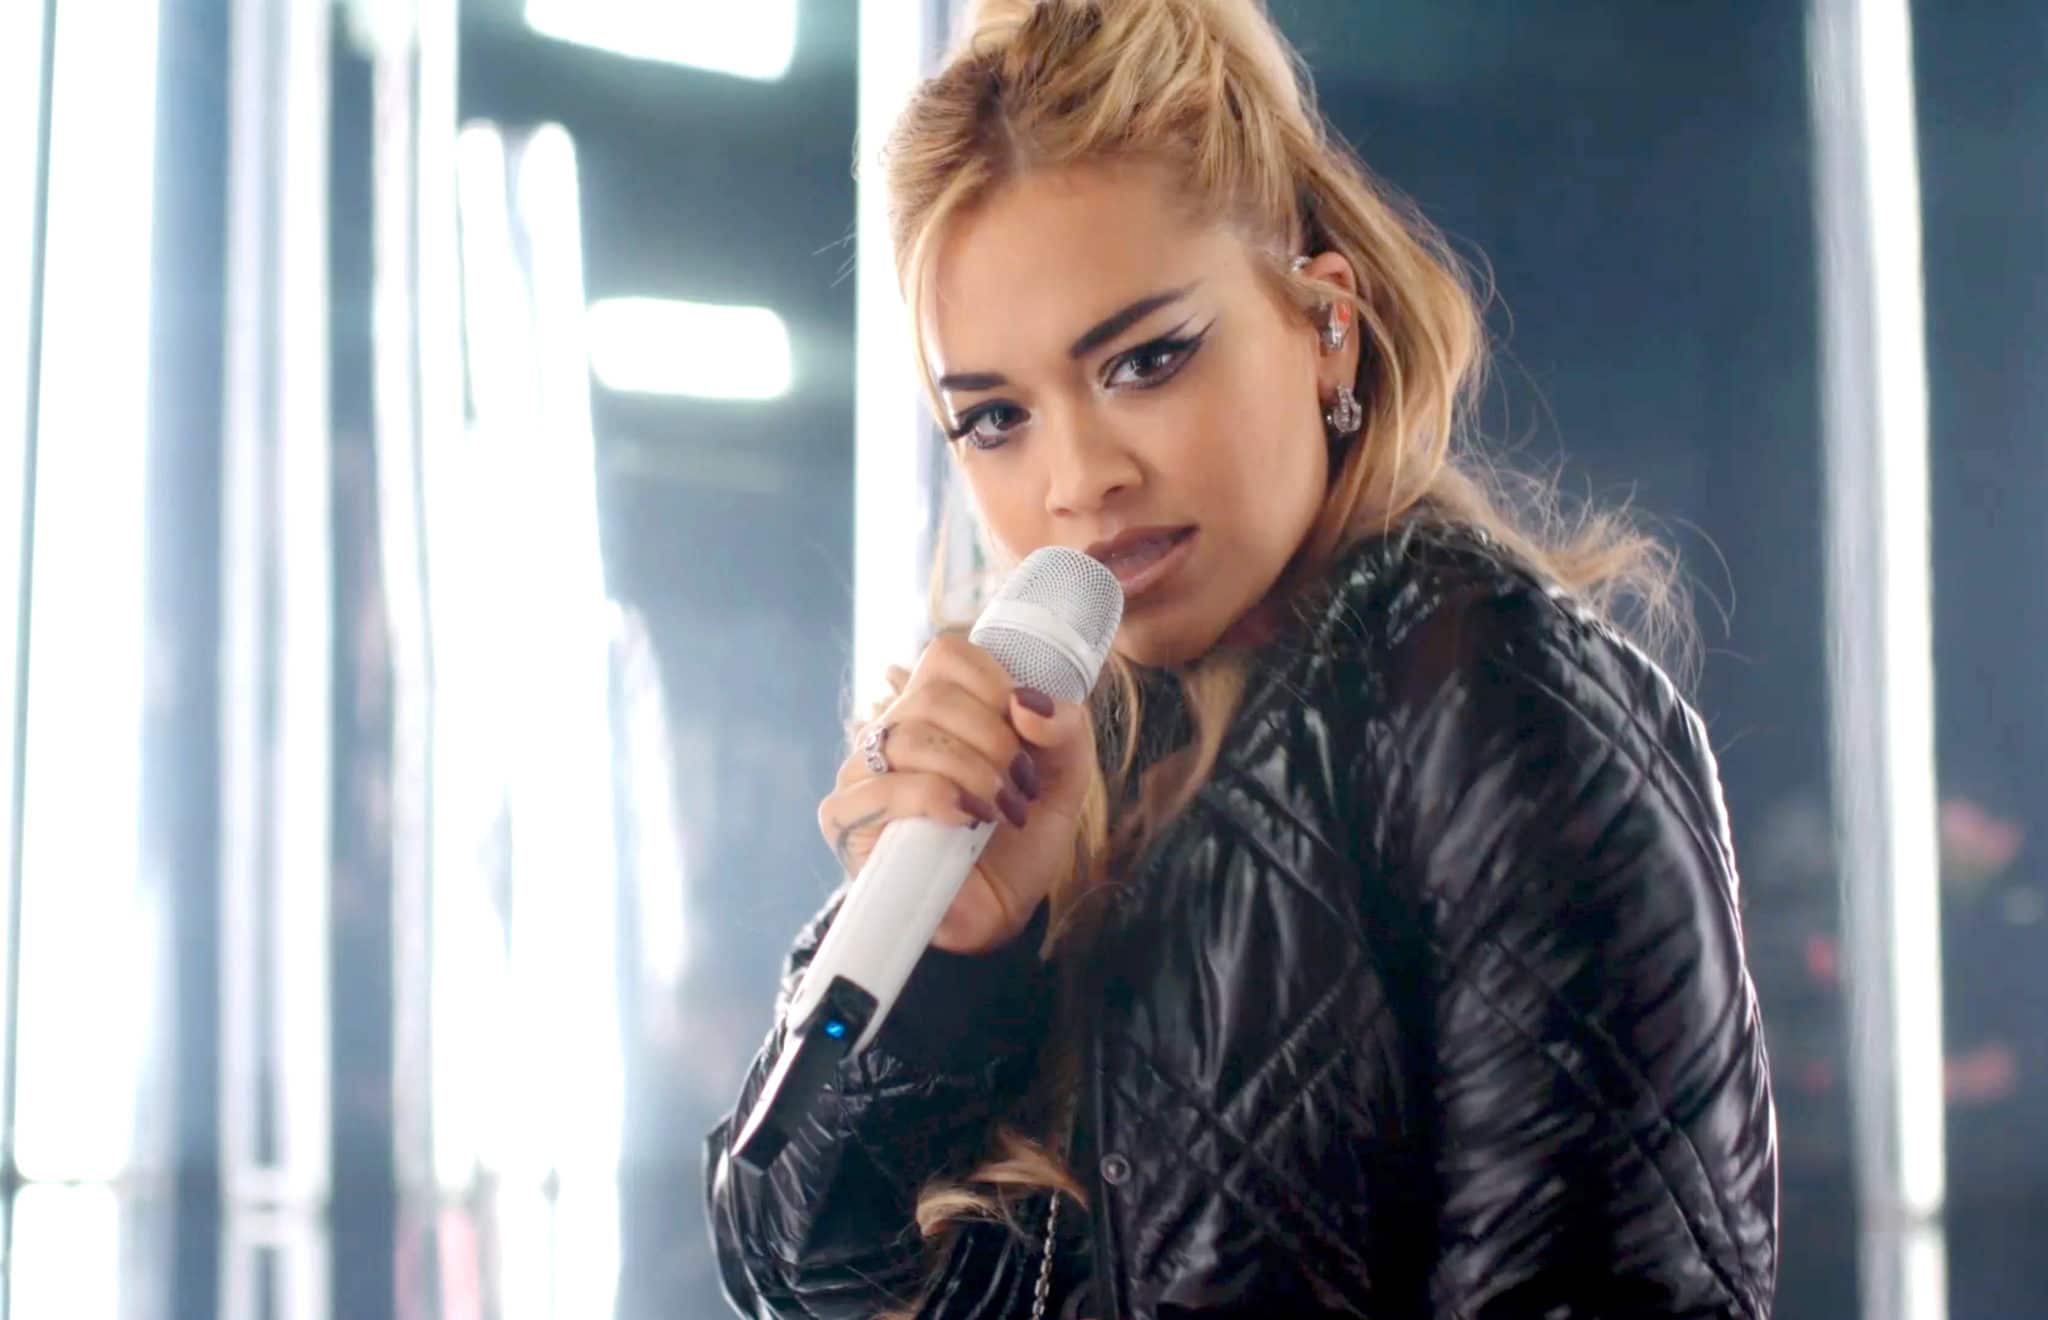 Rita Ora is to perform at the Sydney Gay and Lesbian Mardi Gras 